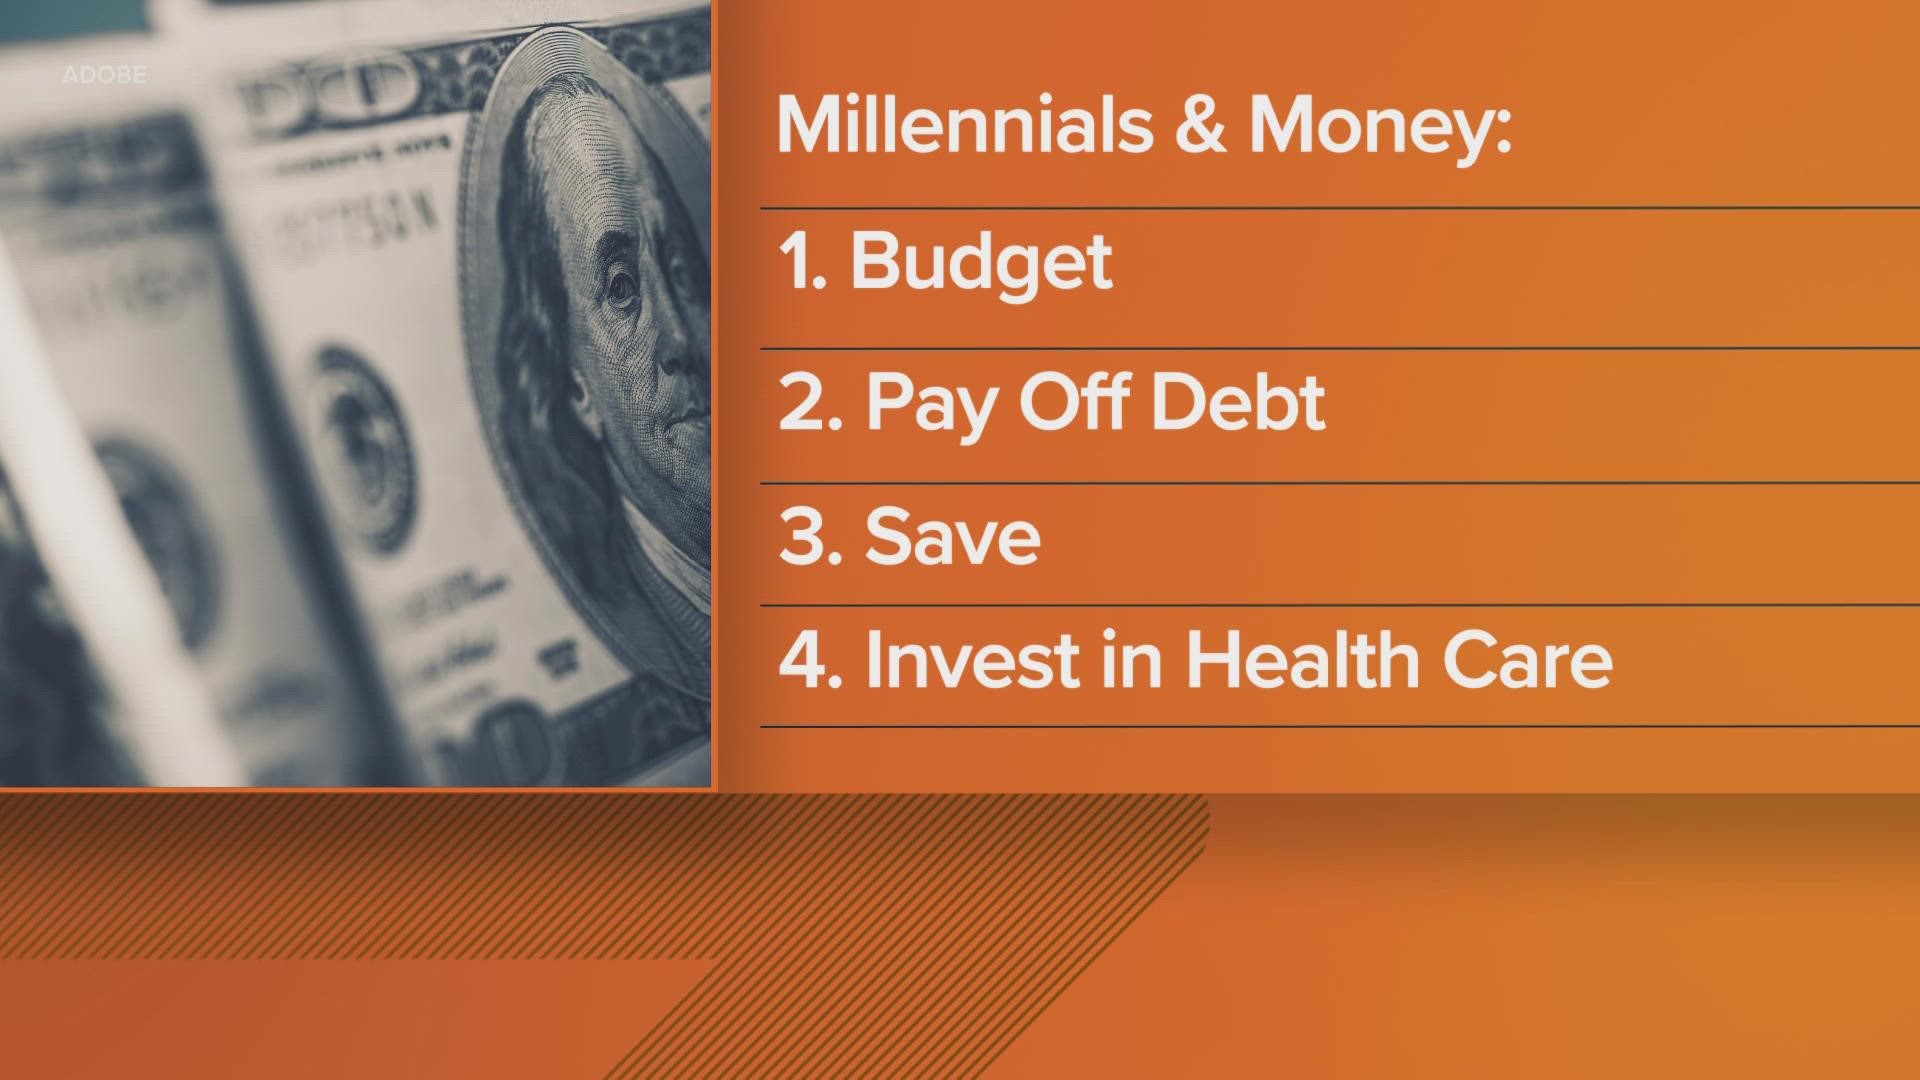 The youngest millennials are closing in on their 30s, which means financial awareness and understanding have become even more important, a financial advisor said.